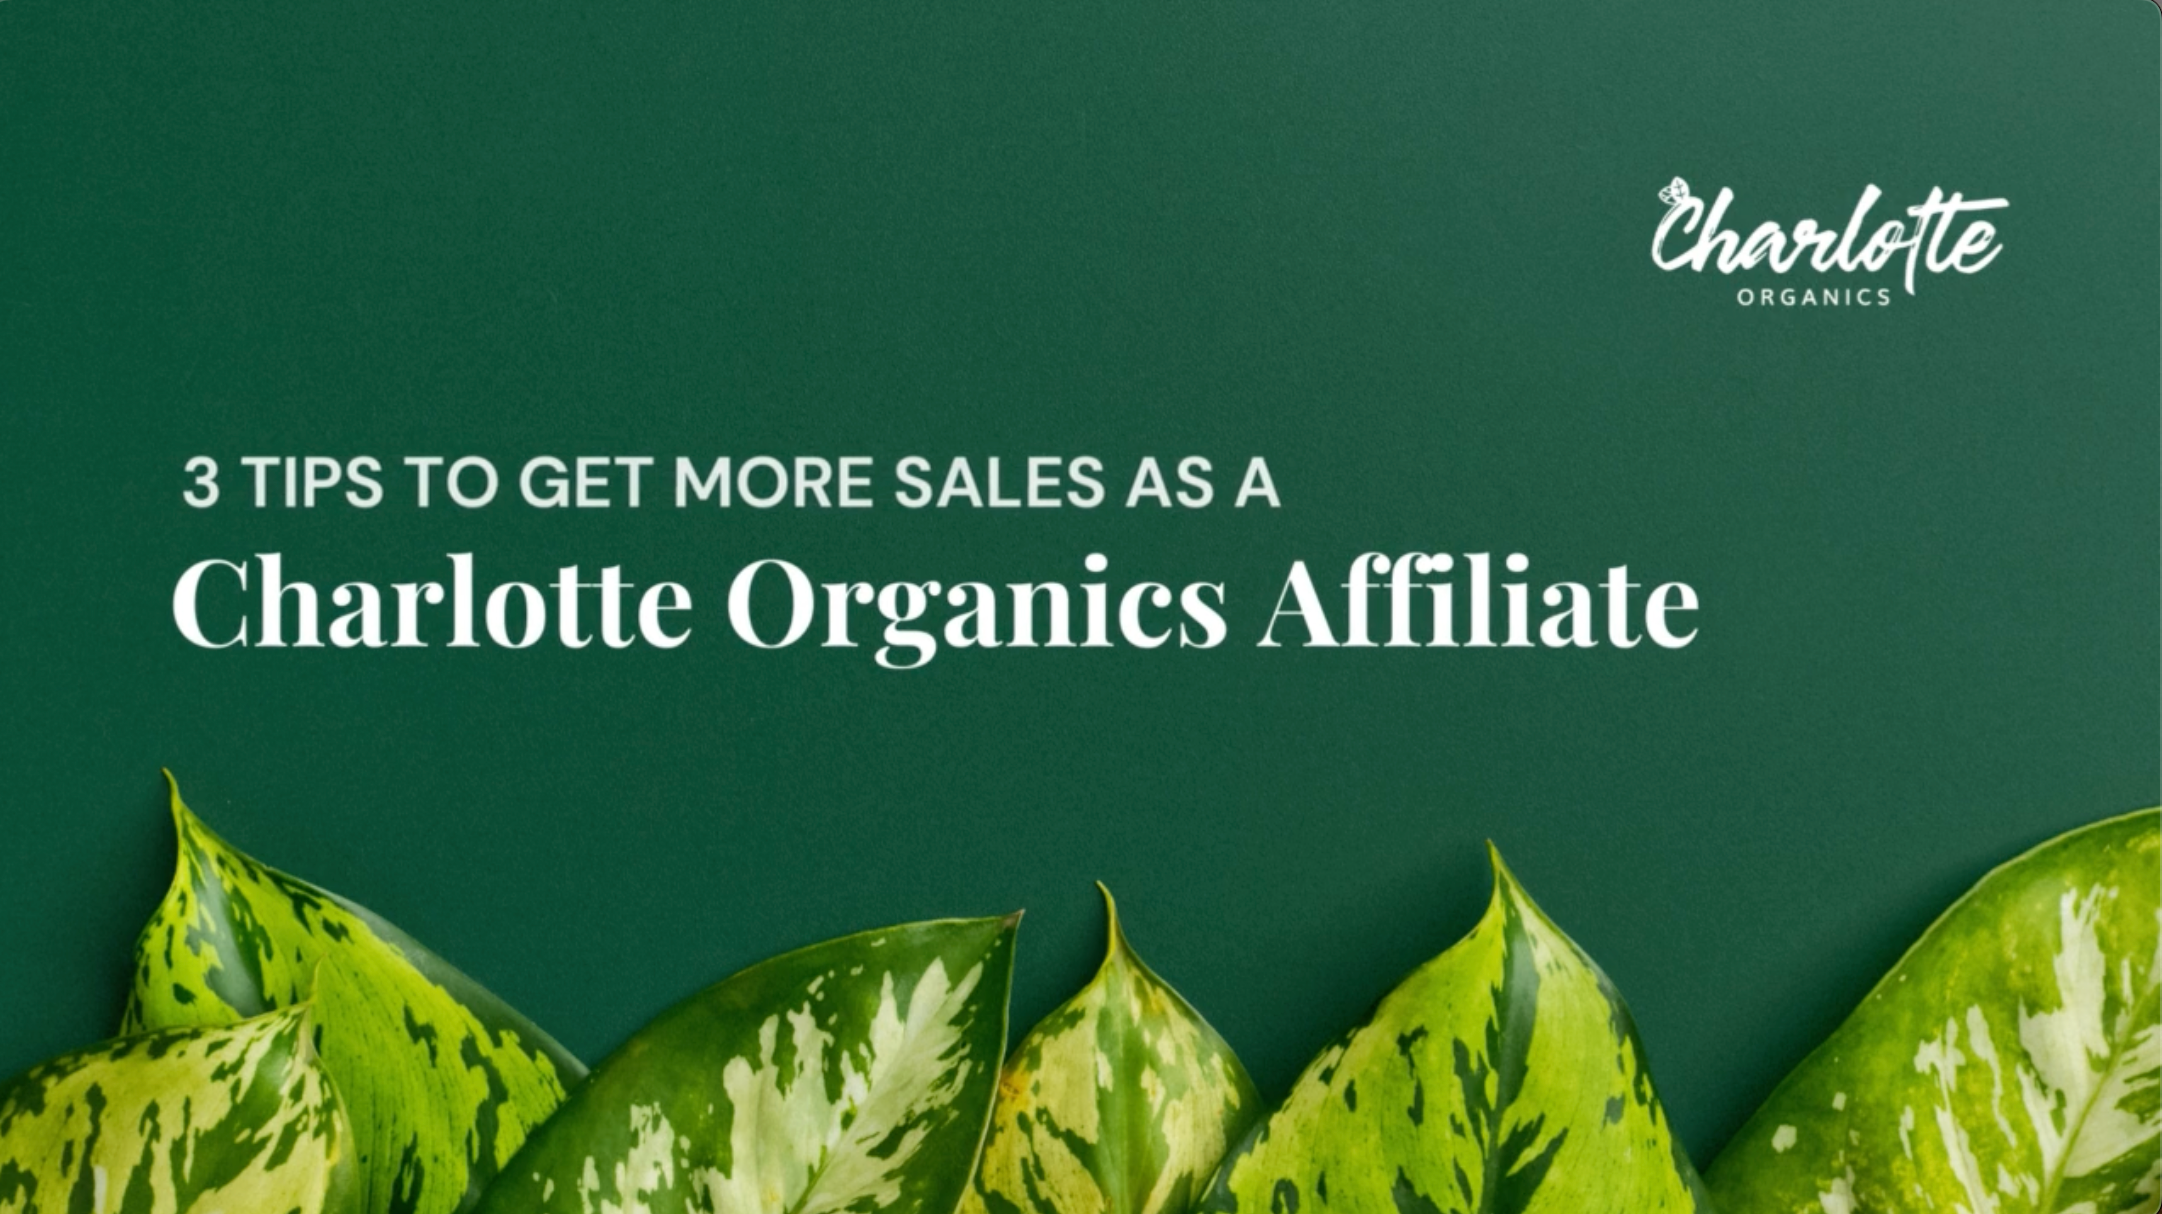 Load video: CHARLOTTE ORGANICS 3 TIPS TO GET SALES AS AFFILIATE